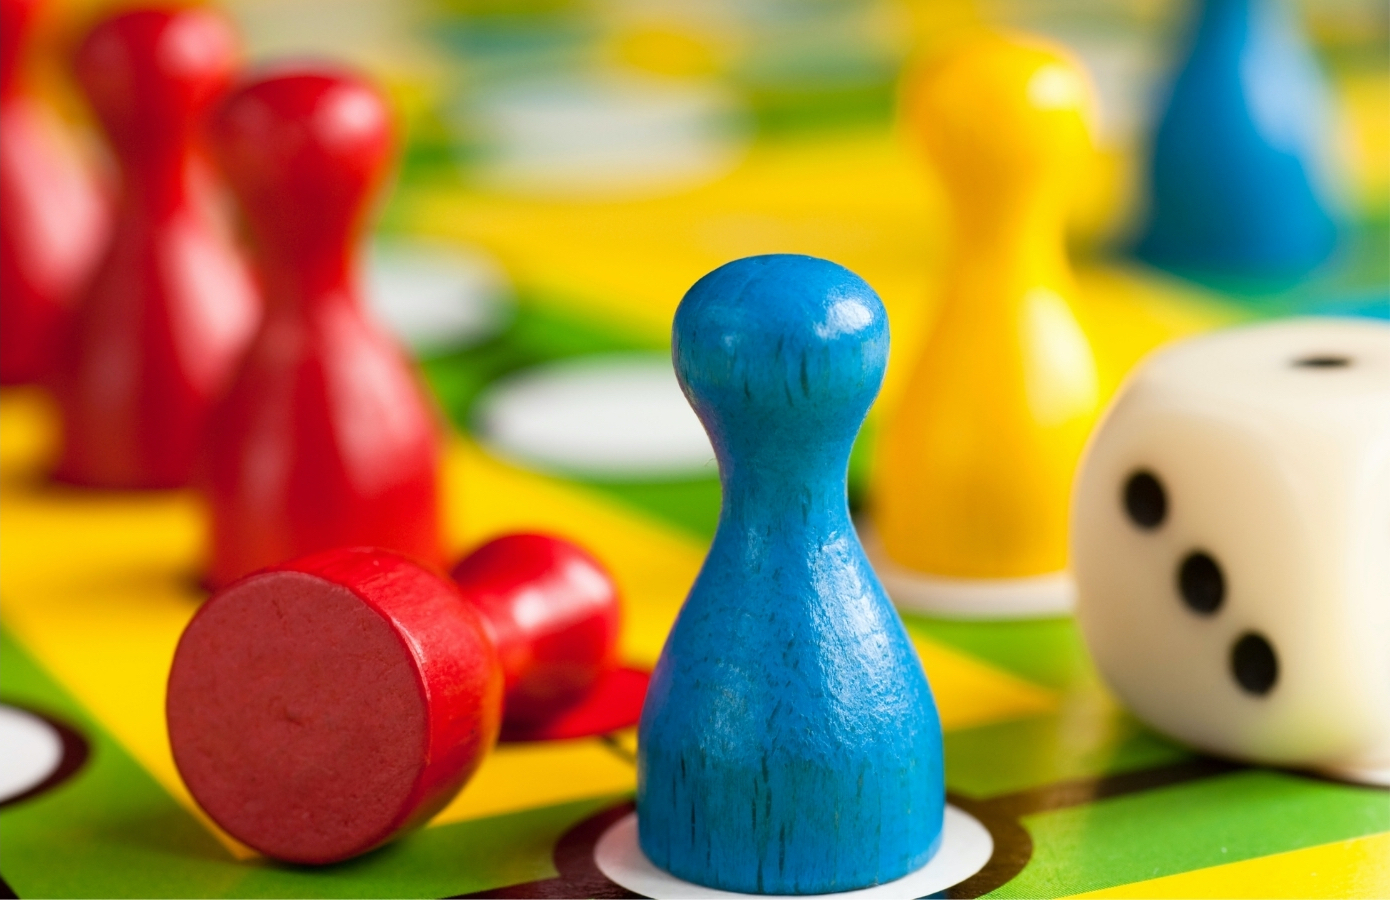 11 best board games for preschoolers (that are fun for the whole family)